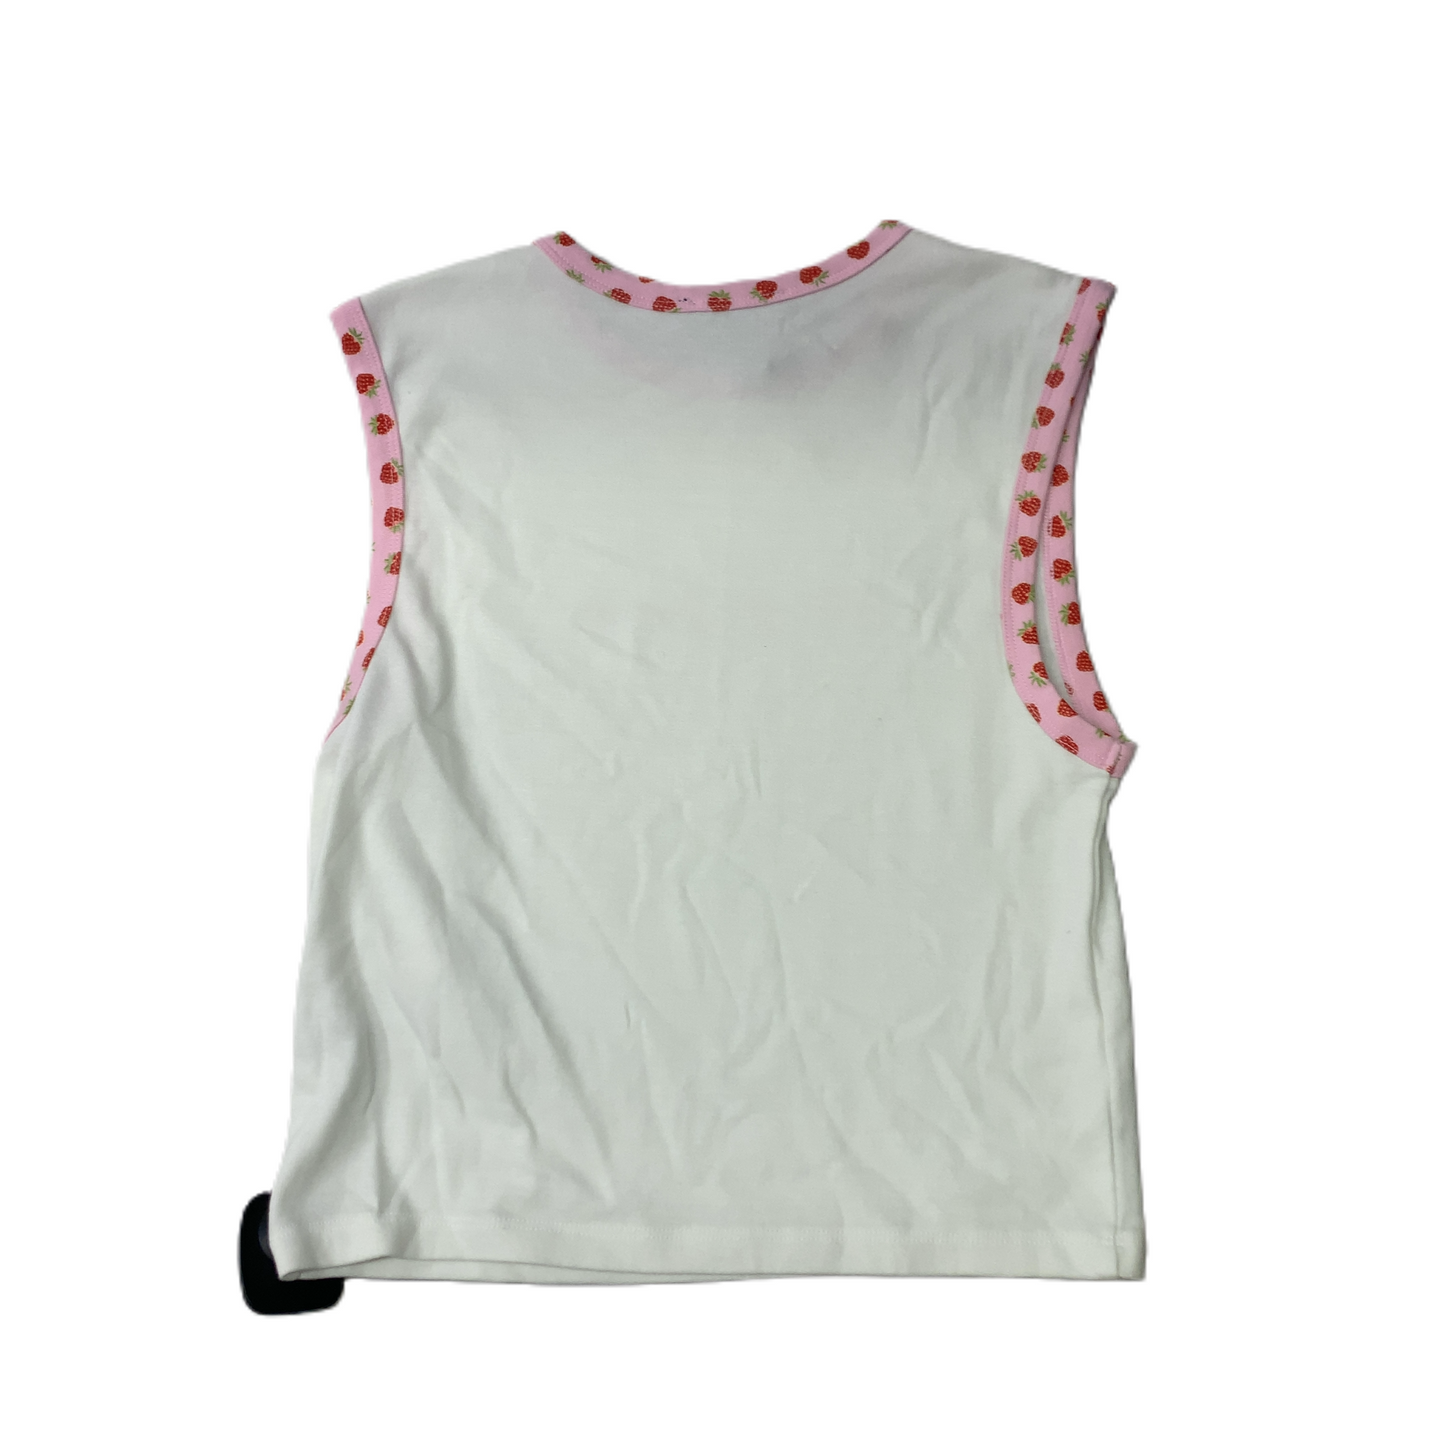 Pink & White  Top Sleeveless By Forever 21  Size: M